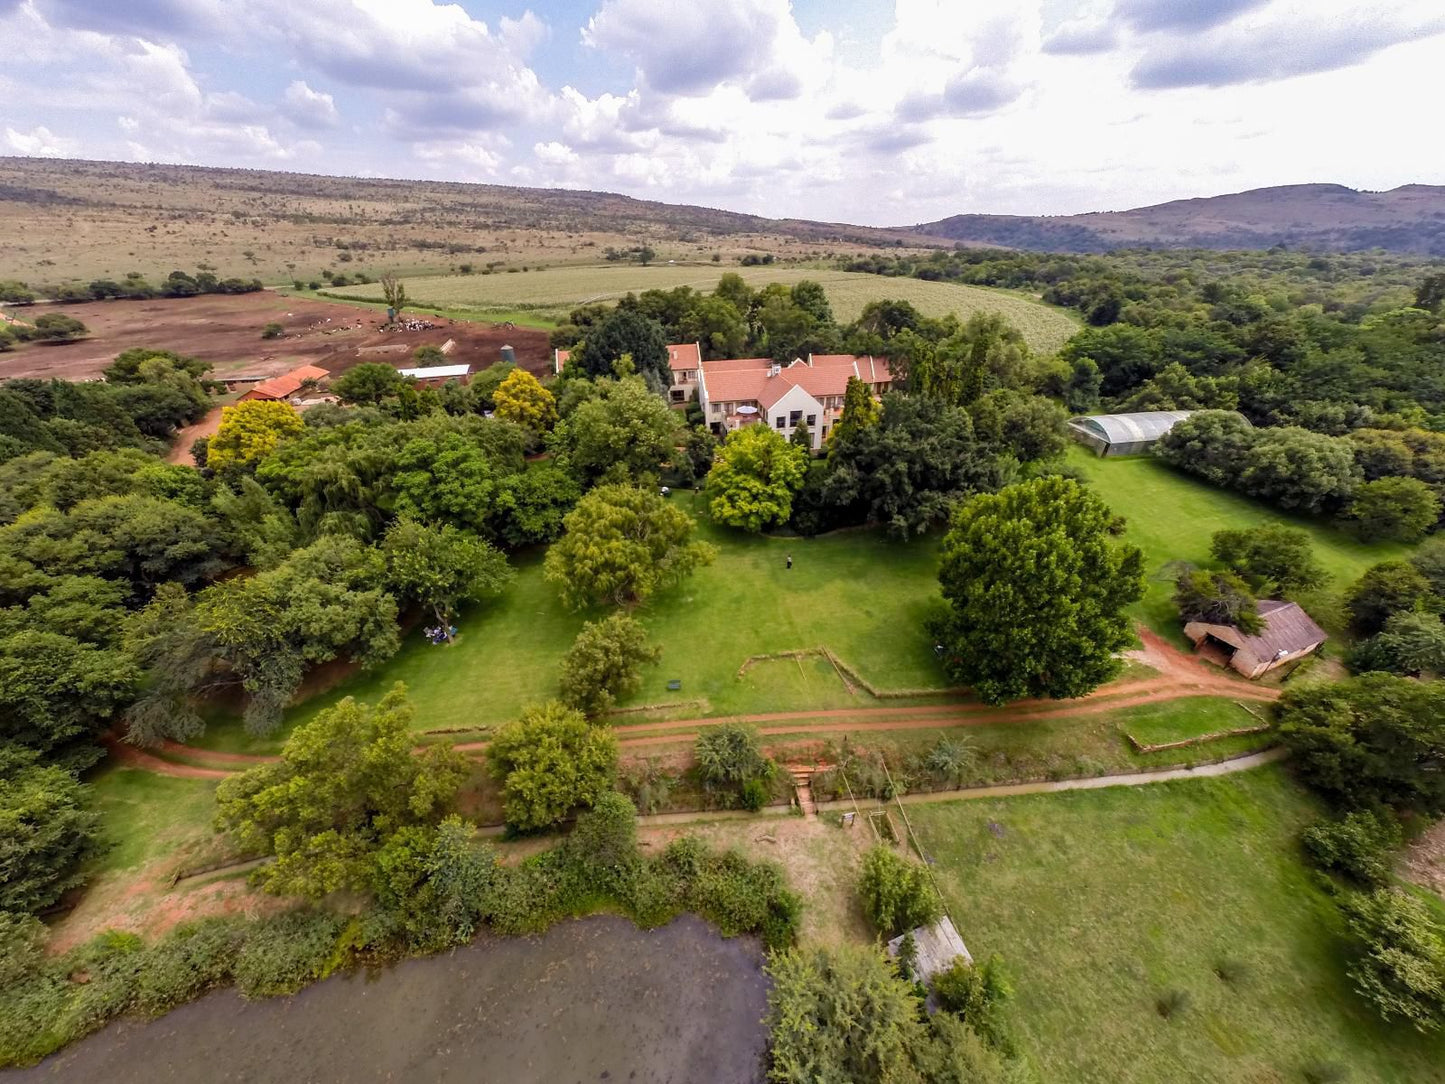 Budmarsh Country Lodge Magaliesburg Gauteng South Africa House, Building, Architecture, Aerial Photography